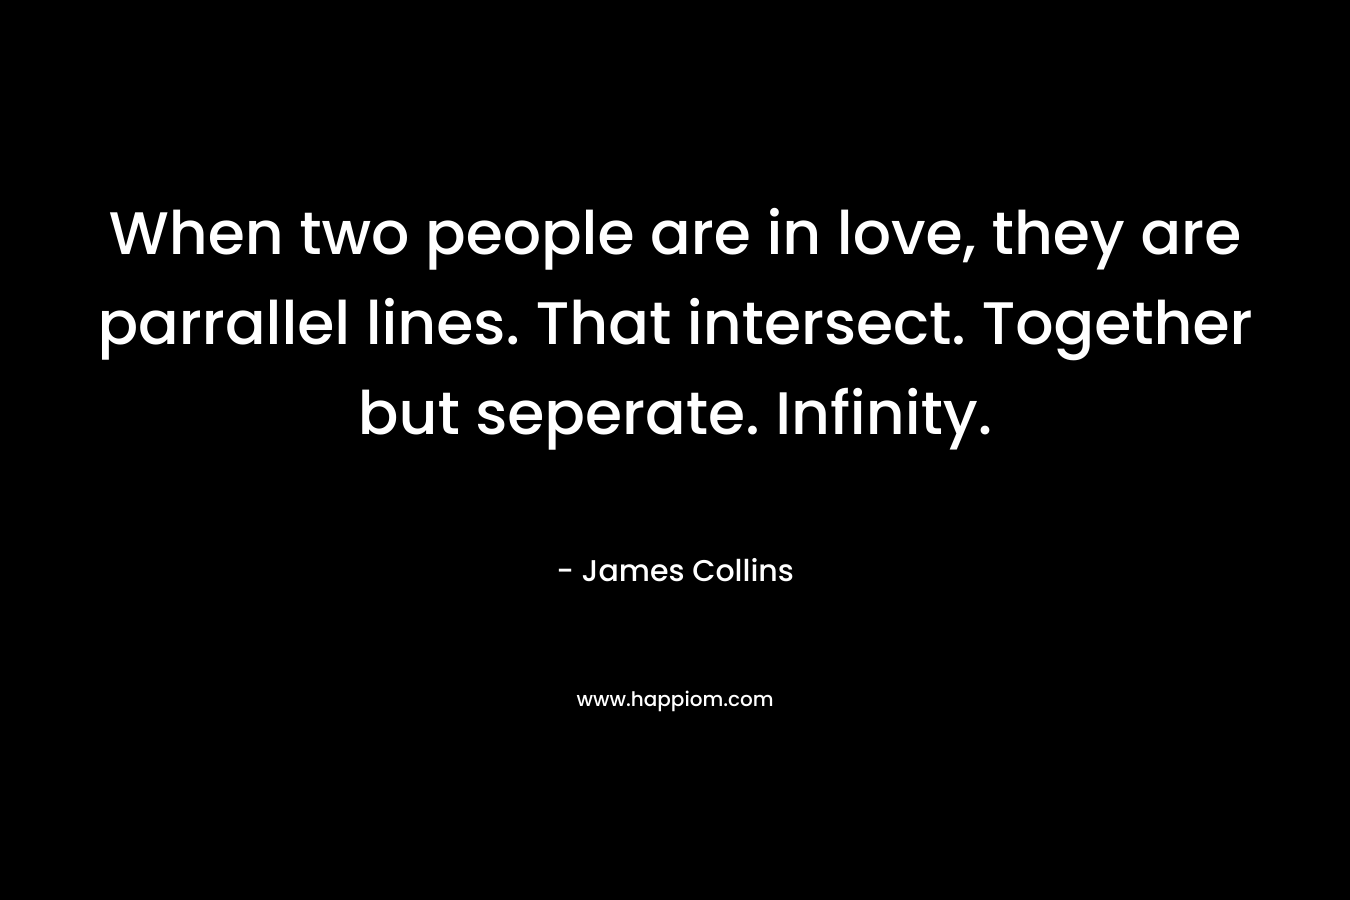 When two people are in love, they are parrallel lines. That intersect. Together but seperate. Infinity. – James Collins